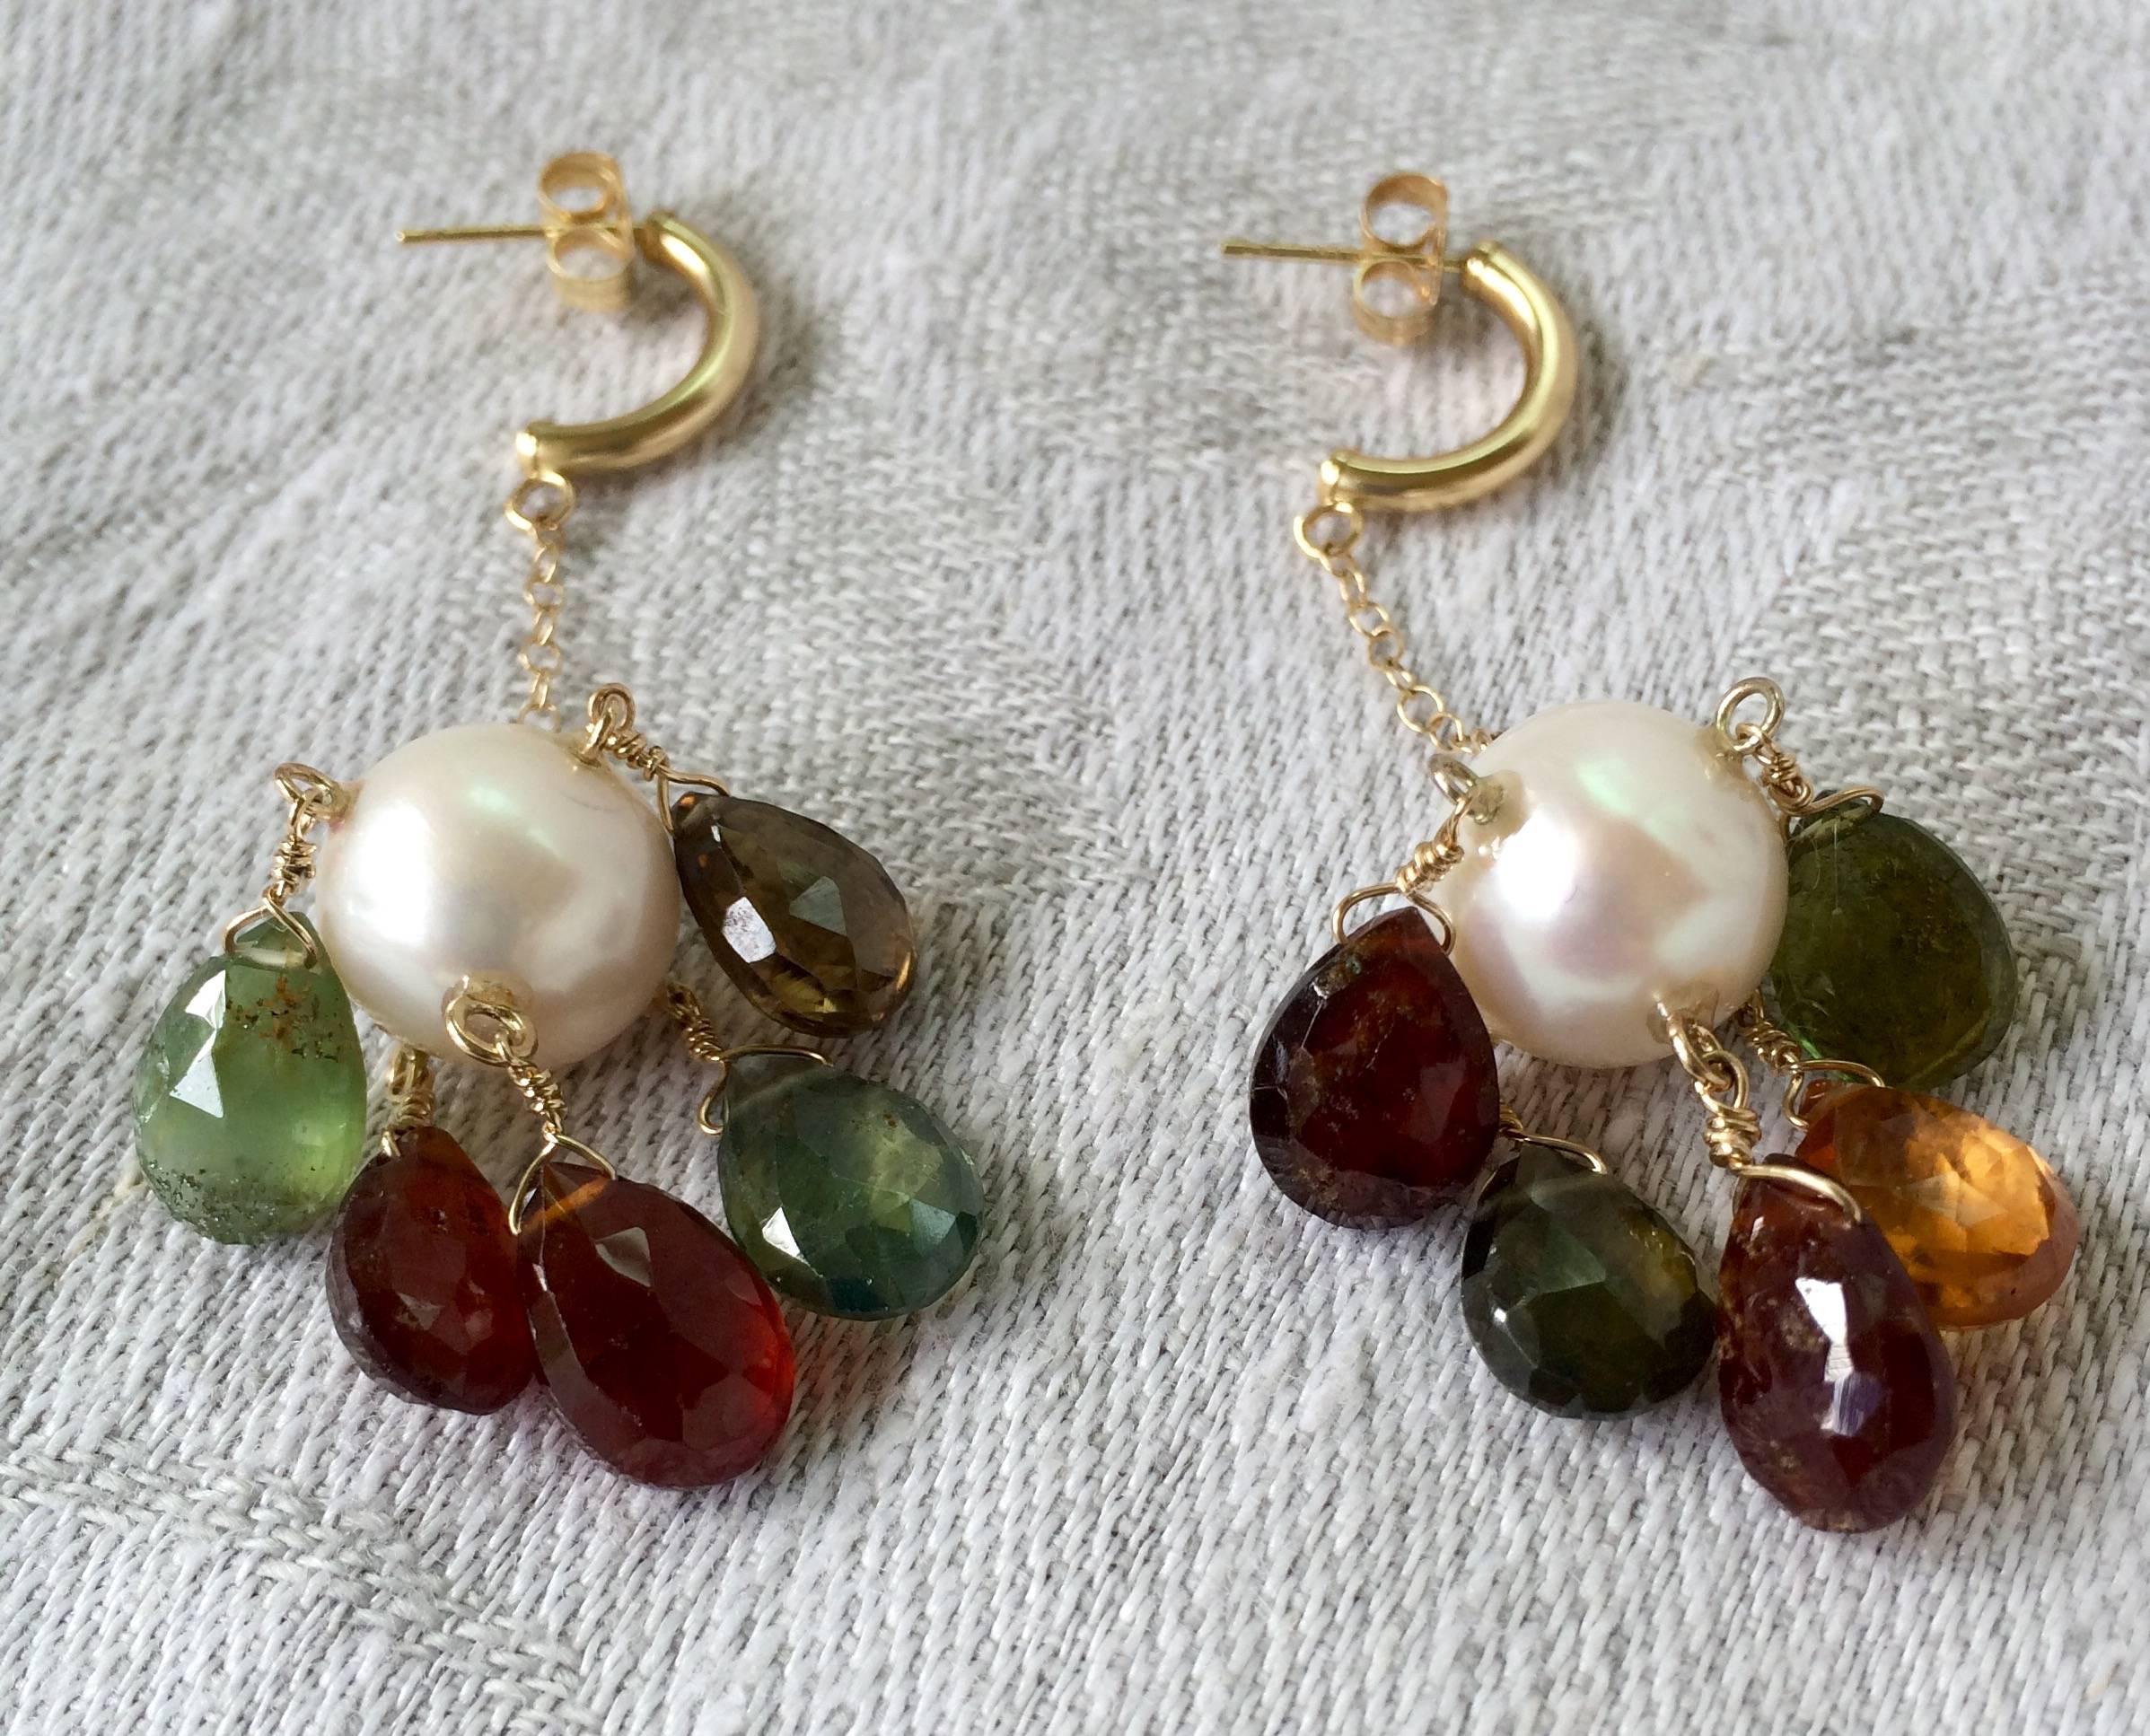 Gorgeous pair of earrings by Marina J. This Chandelier Earring set is adorned with beautiful multi colored and faceted Tourmaline Teardrop Briolettes! The faceted Tourmaline shine wonderfully and their translucency makes them radiate wonderful color